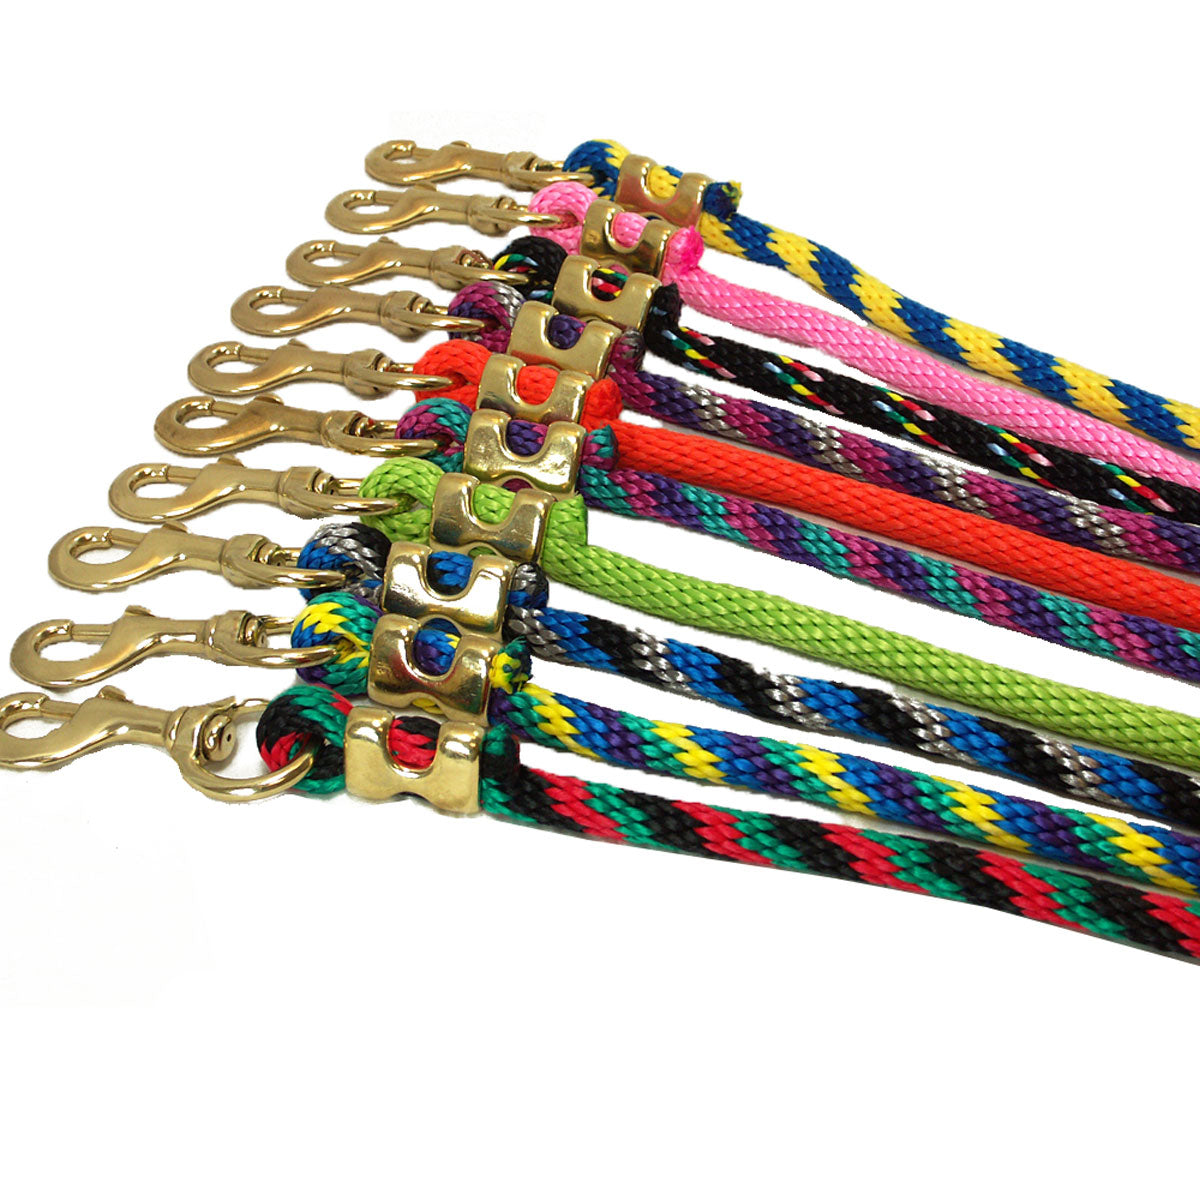 Poly Lead Rope Assorted Bright Colors 8' - 12/pack